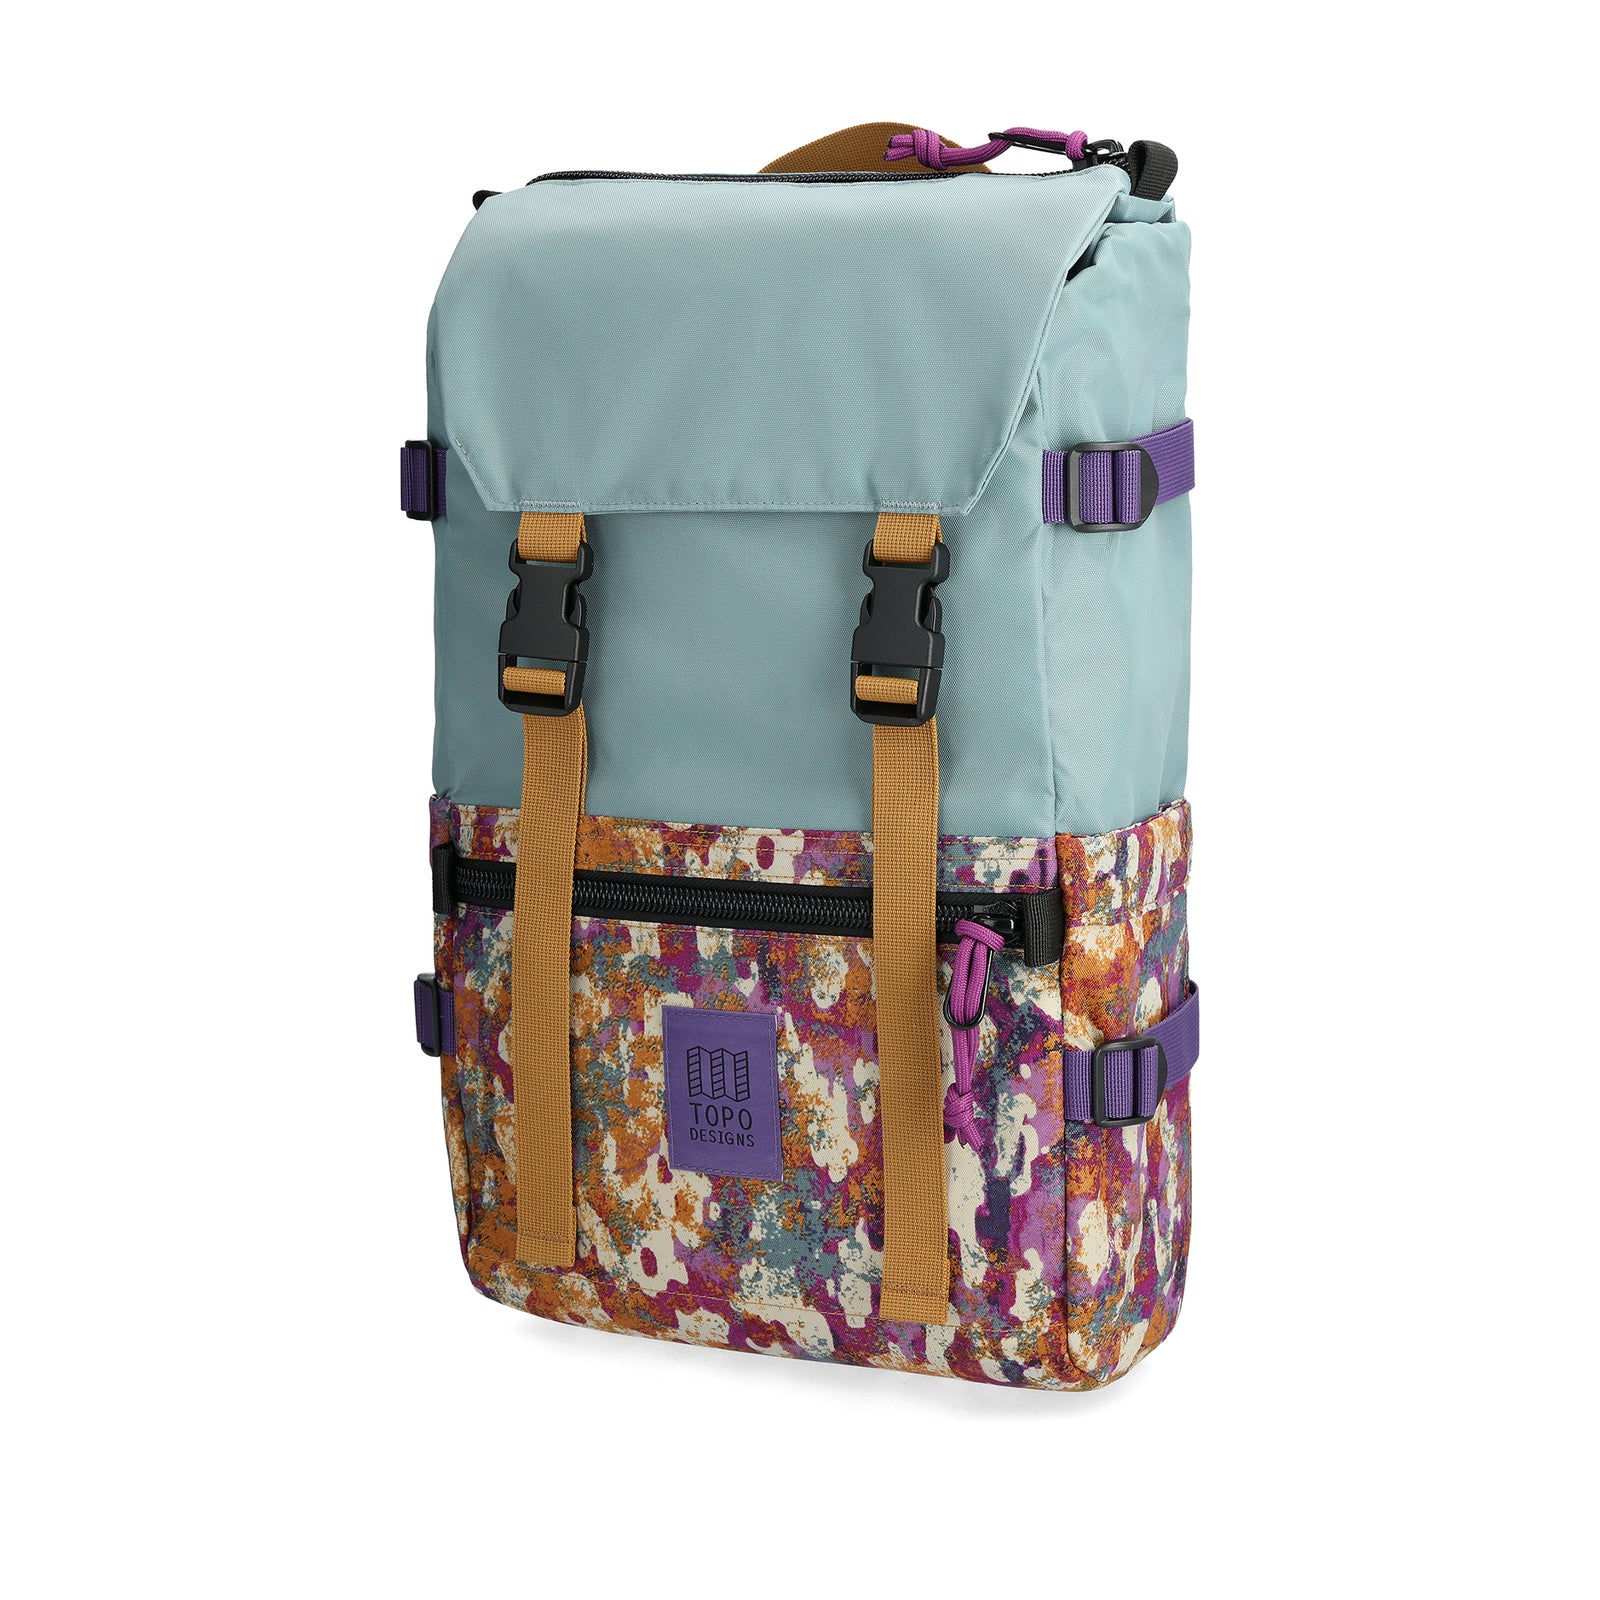 Front View of Topo Designs Rover Pack Classic in "Slate Blue / Khaki Celestial"